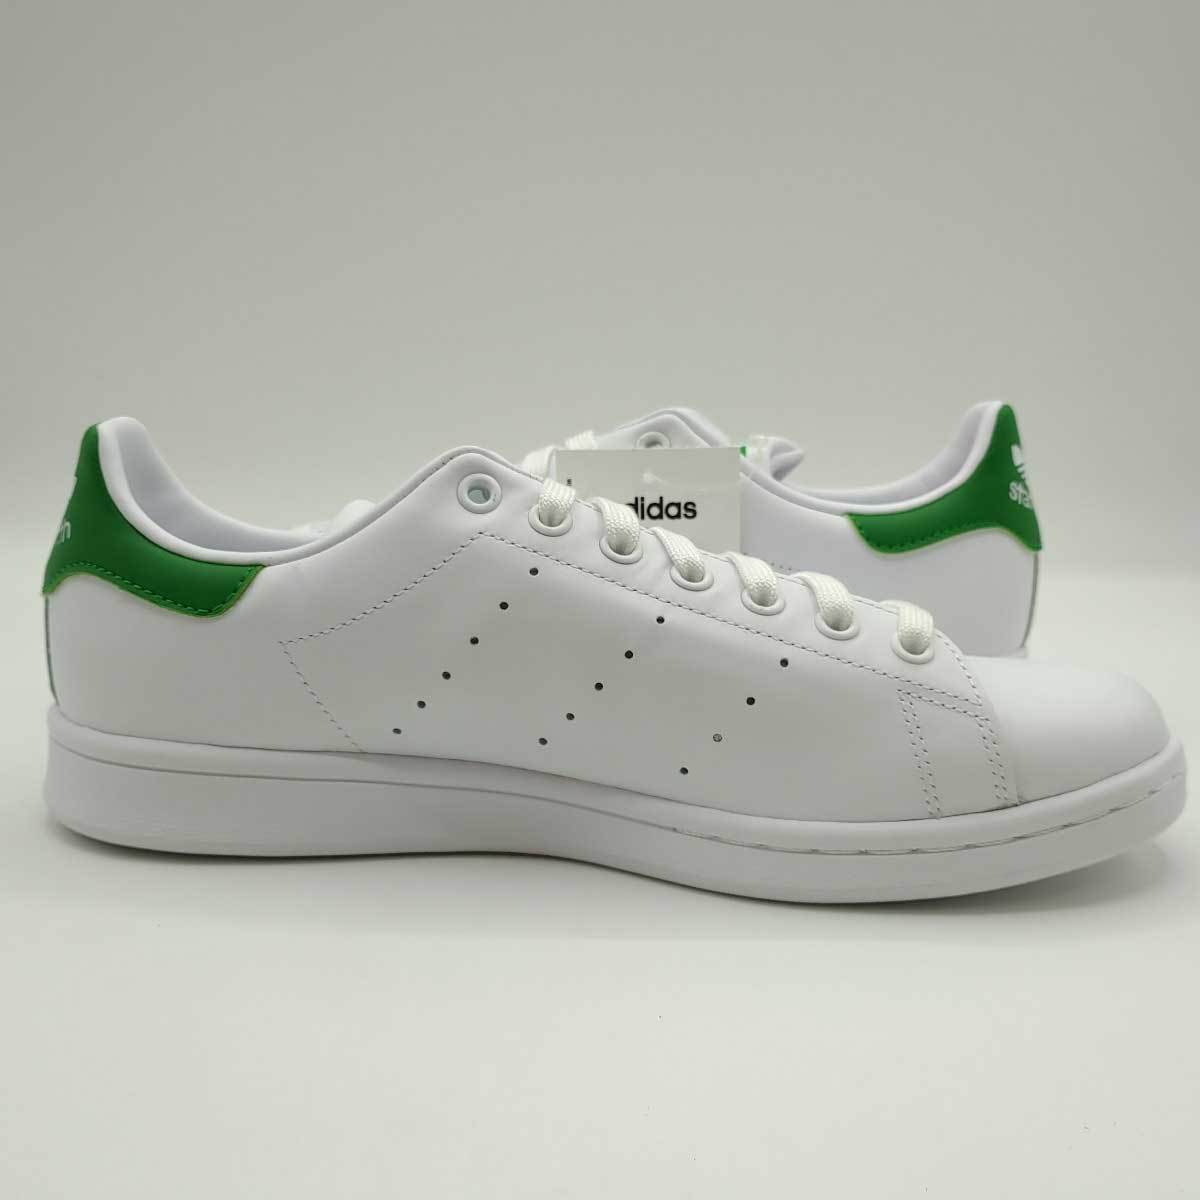 [ used ] Adidas Stansmith sneakers STAN SMITH leather 26.5cm white x green M20324 men's ADIDAS 2019 year made 